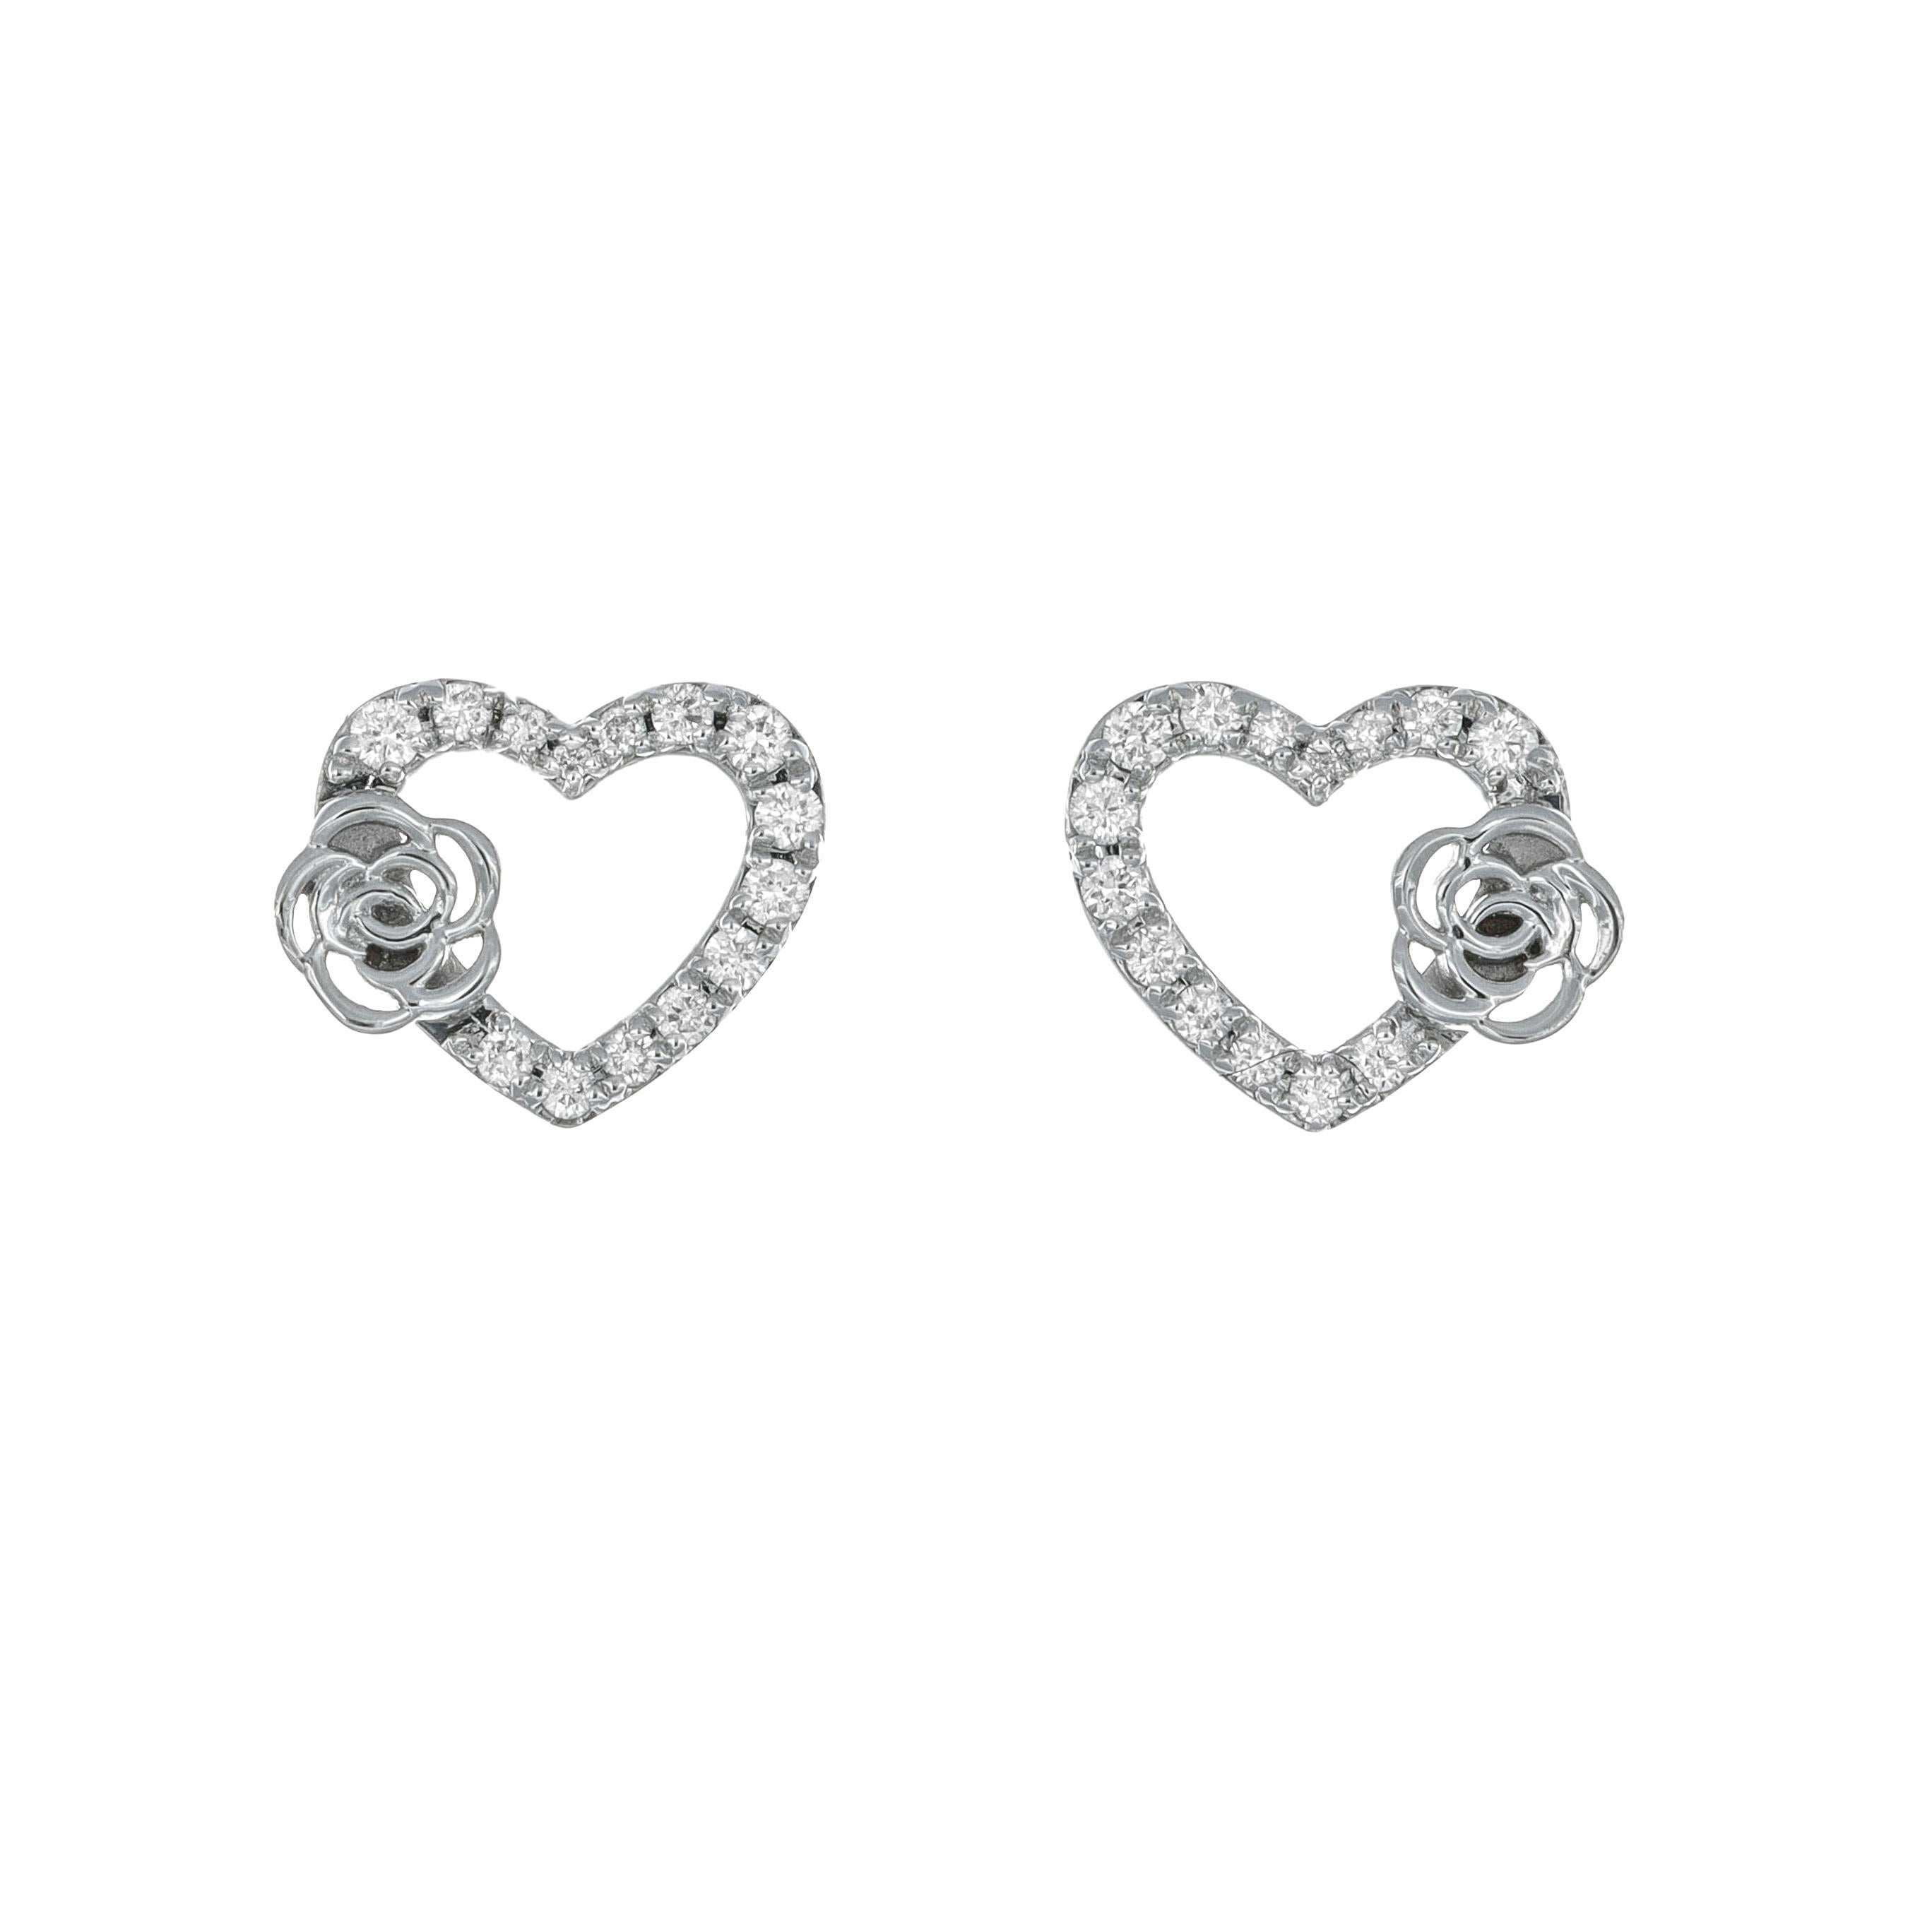 At the heart of each earring lies a captivating arrangement of diamonds, meticulously set to form the outline of a contemporary heart shape, adding a touch of femininity, is the rose flower motif delicately adorns each heart, infusing the earrings